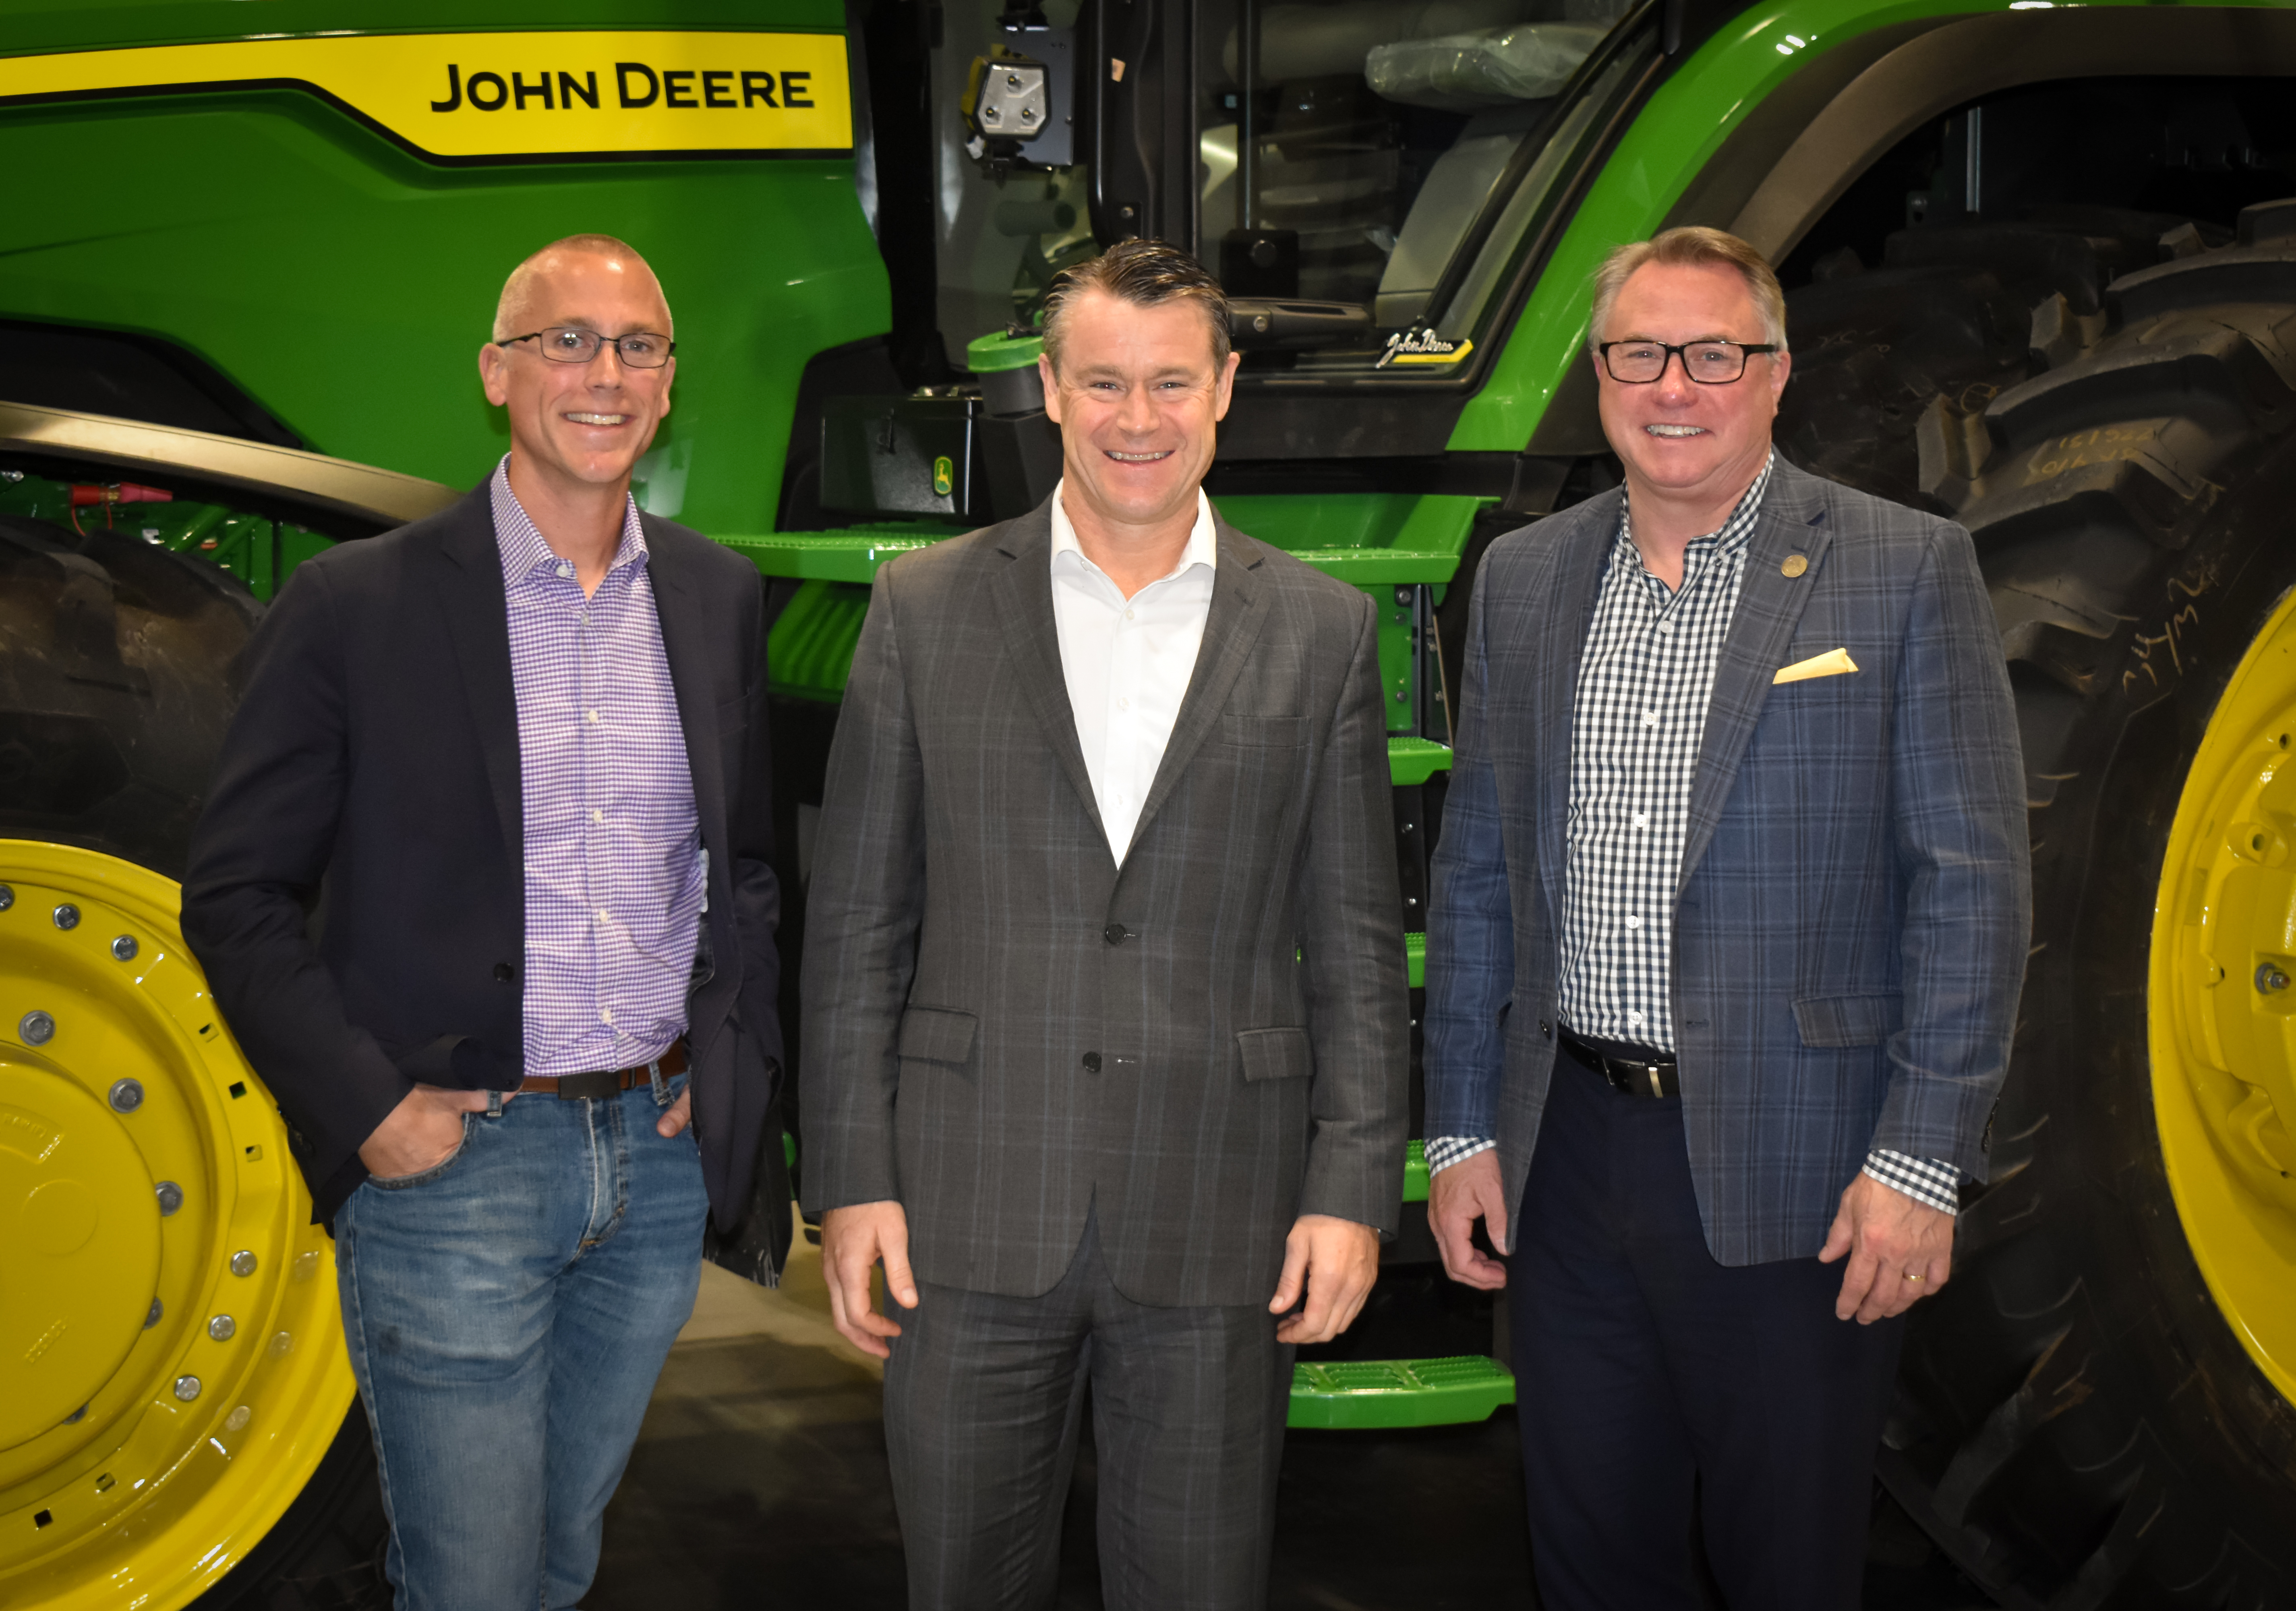 Mitch Frazier, Todd Young and Chuck Johnson standing in front of a green and yellow John Deere tractor.